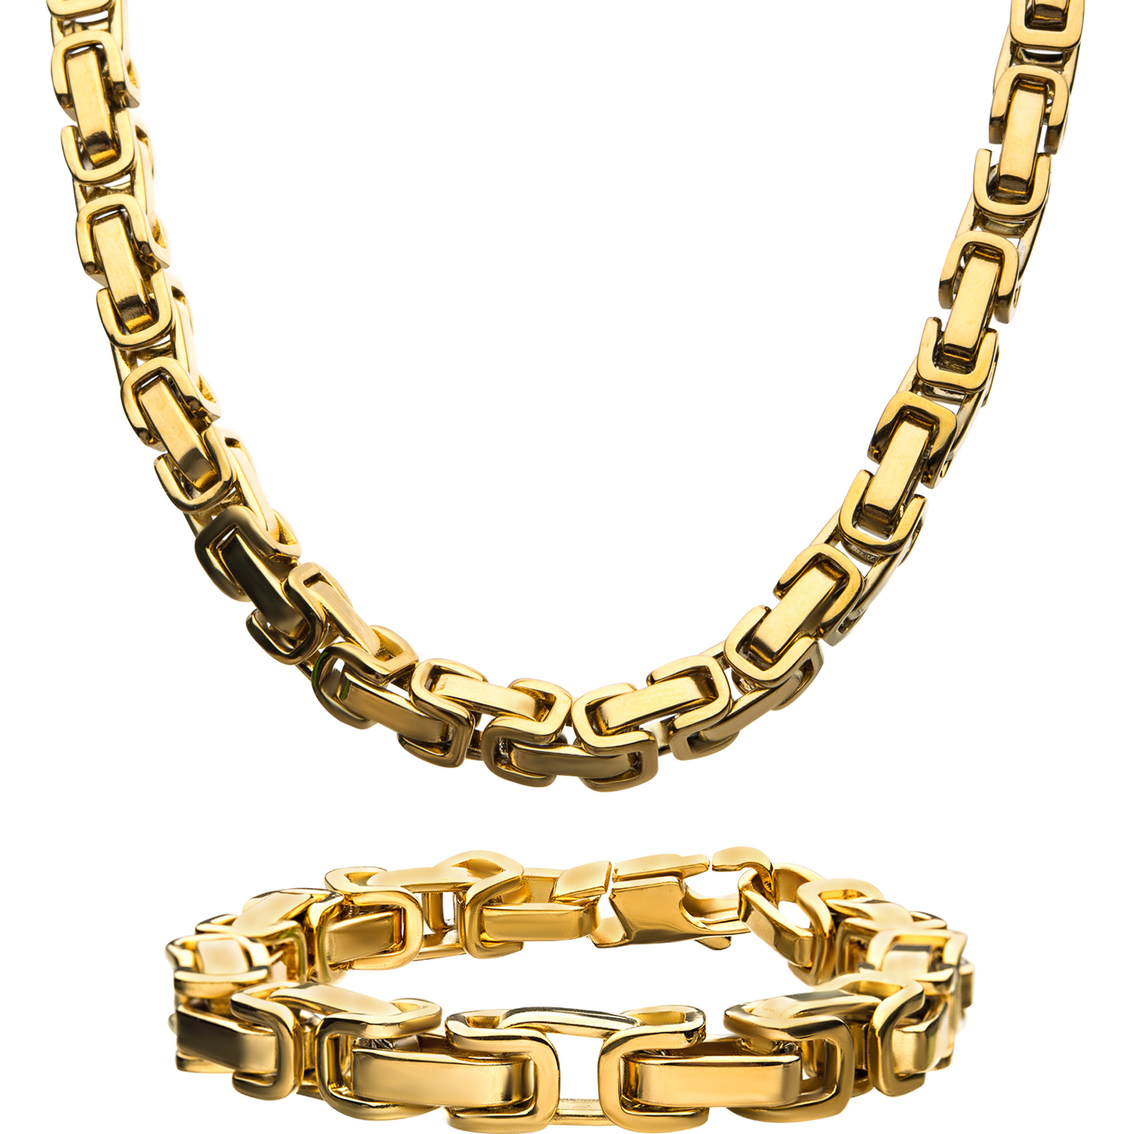 INOX 18K Gold Over Stainless Steel Byzantine Chain/Bracelet Set - Image 1 of 2